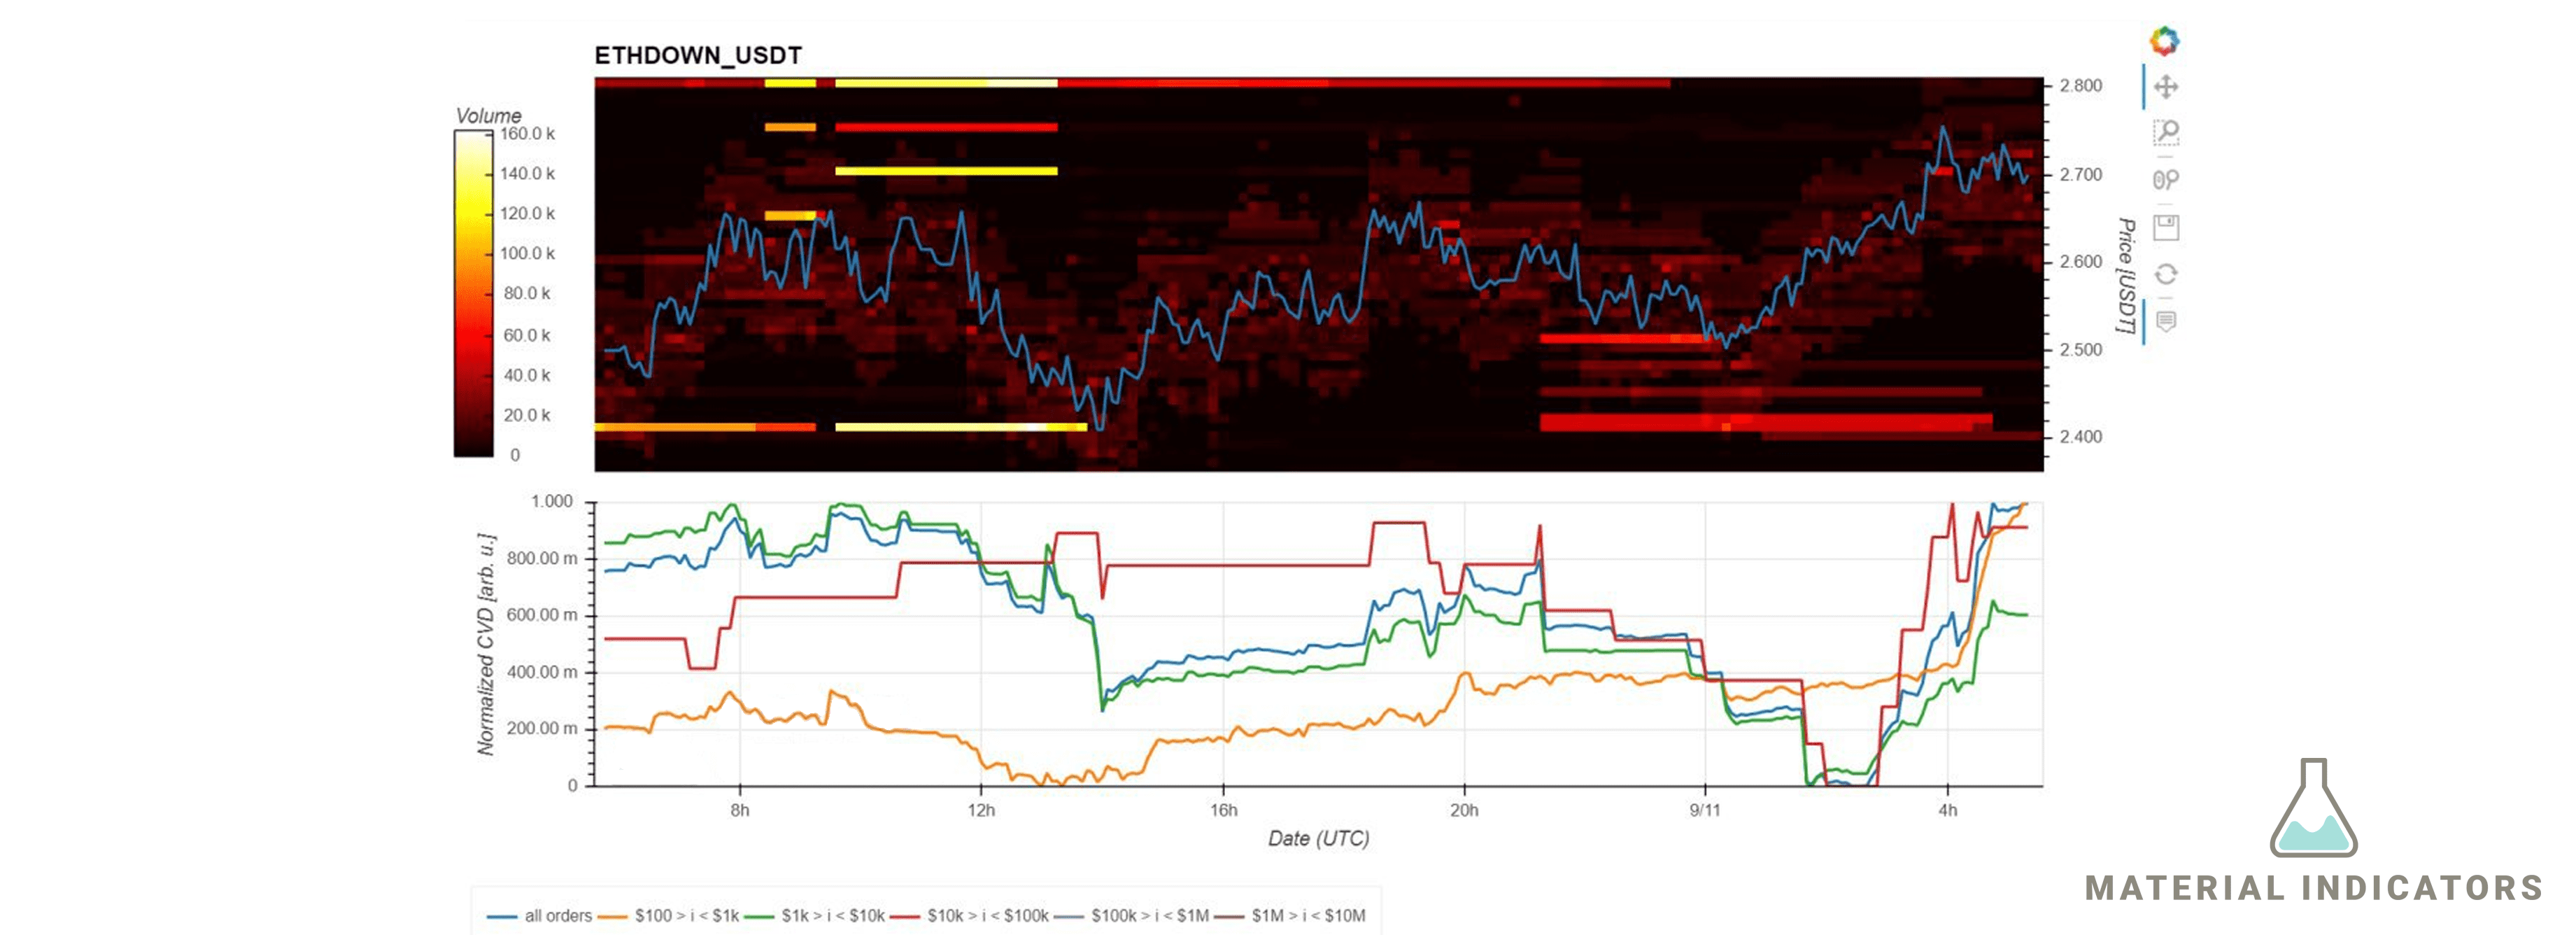 FireCharts or Fire Charts are crypto market data visualization heat maps that show order book and order flow data on crypto coin pairs.